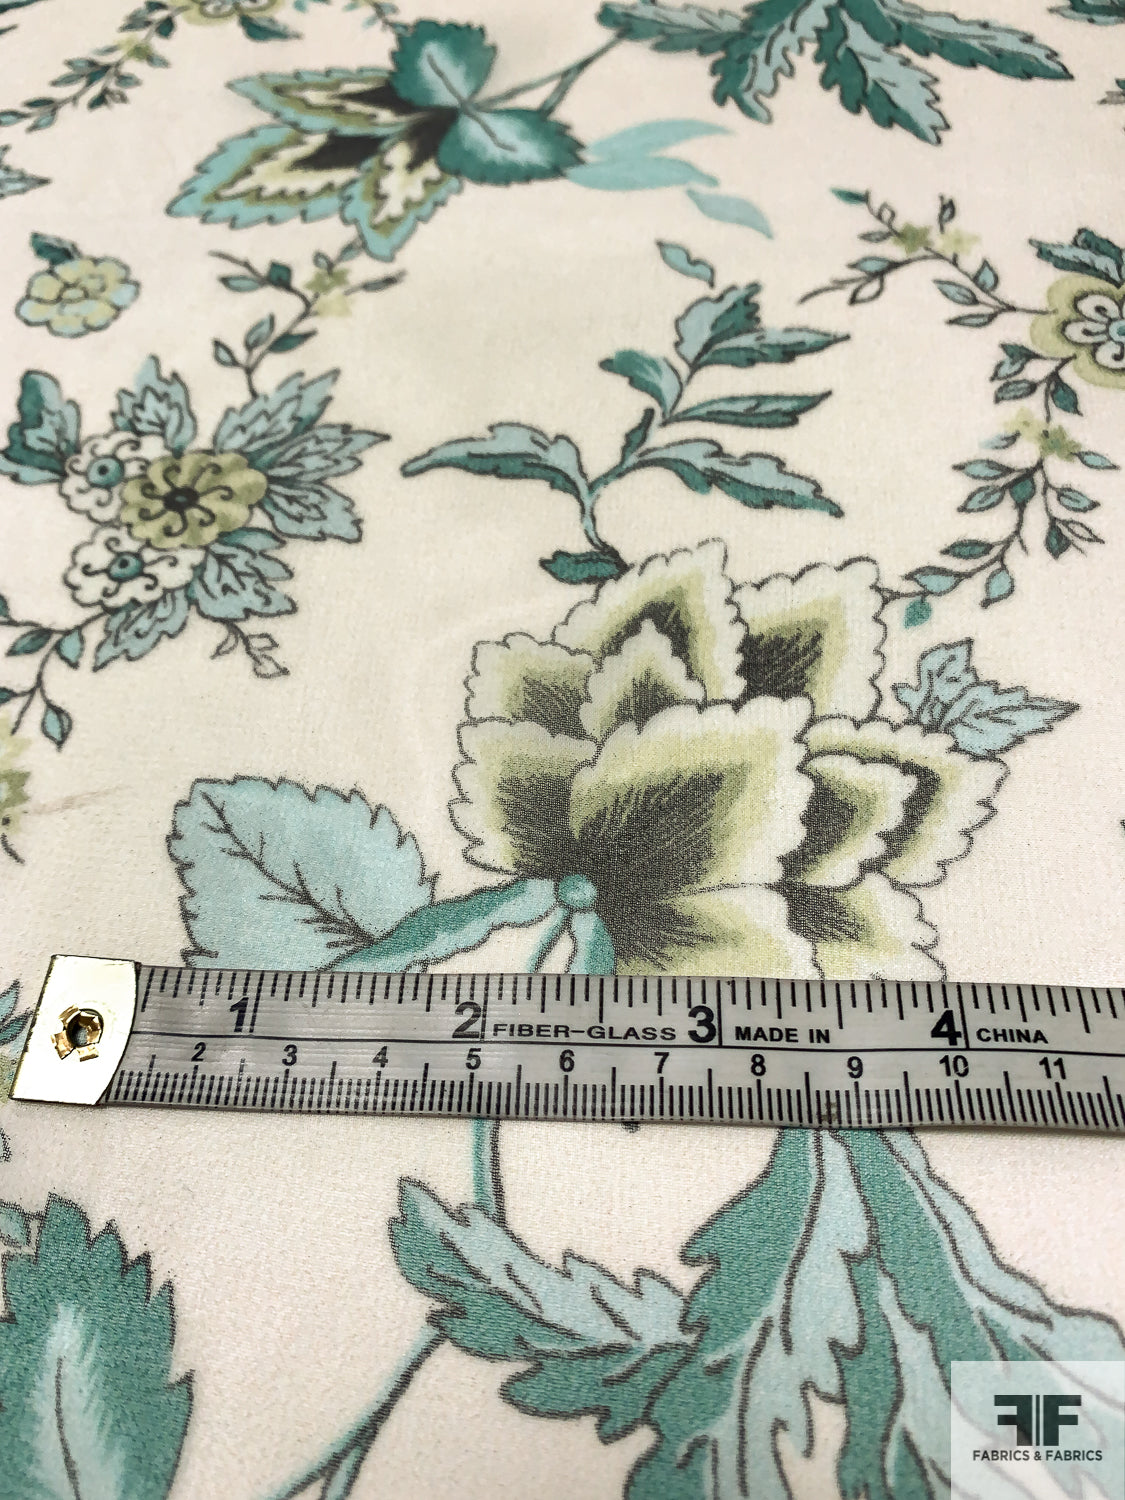 Vintage-Look Floral Printed Heavy Linen Cotton - Green / Dusty Teal / Earth  Tones - Fabric by the Yard